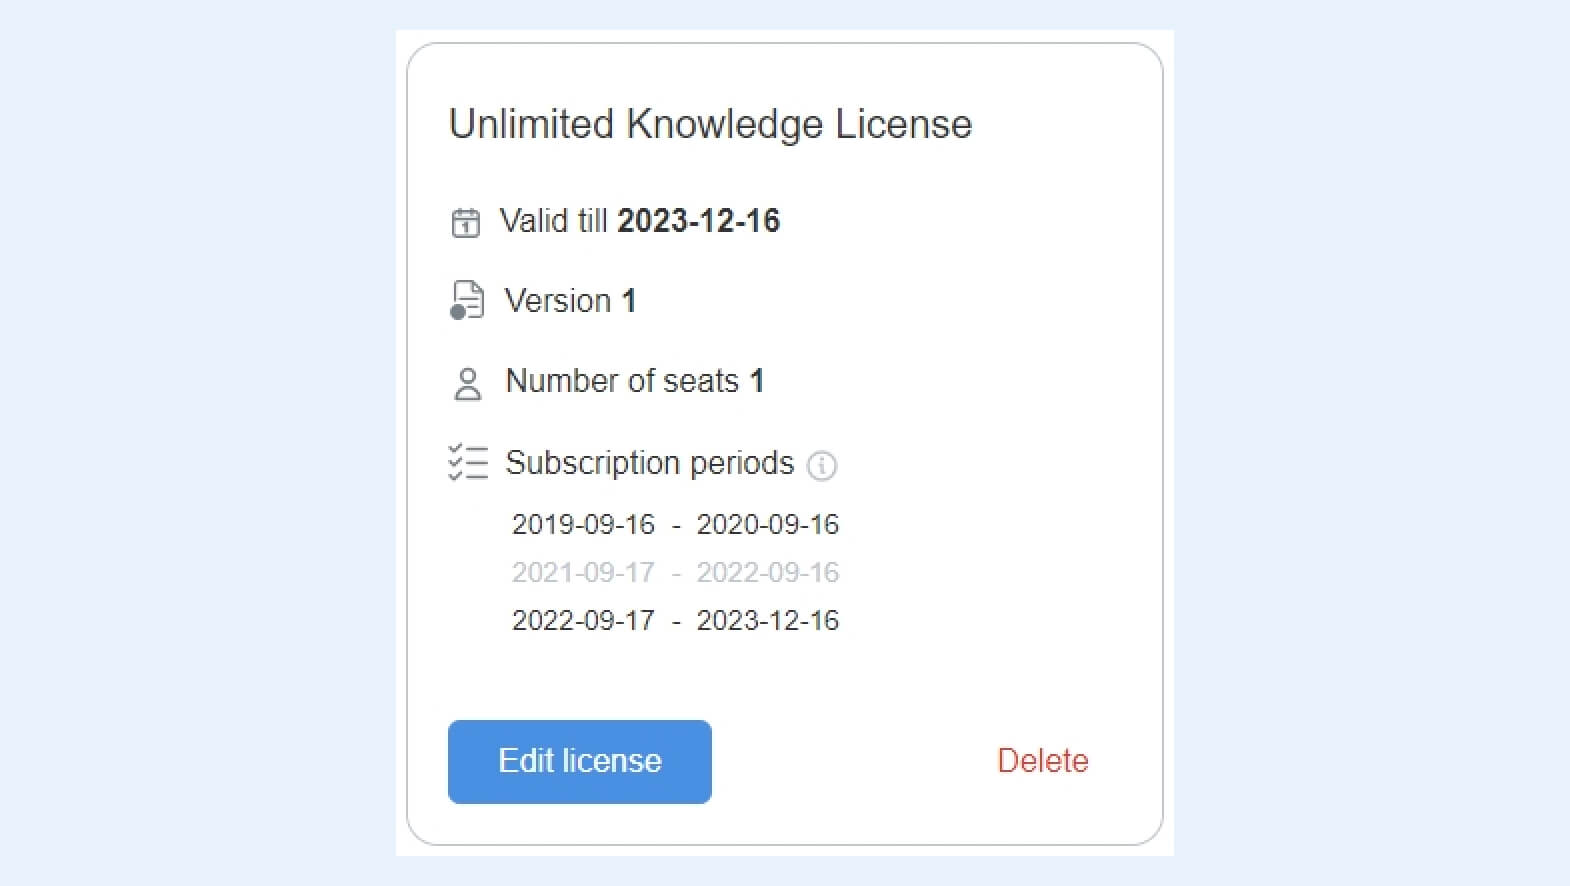 License subscription periods